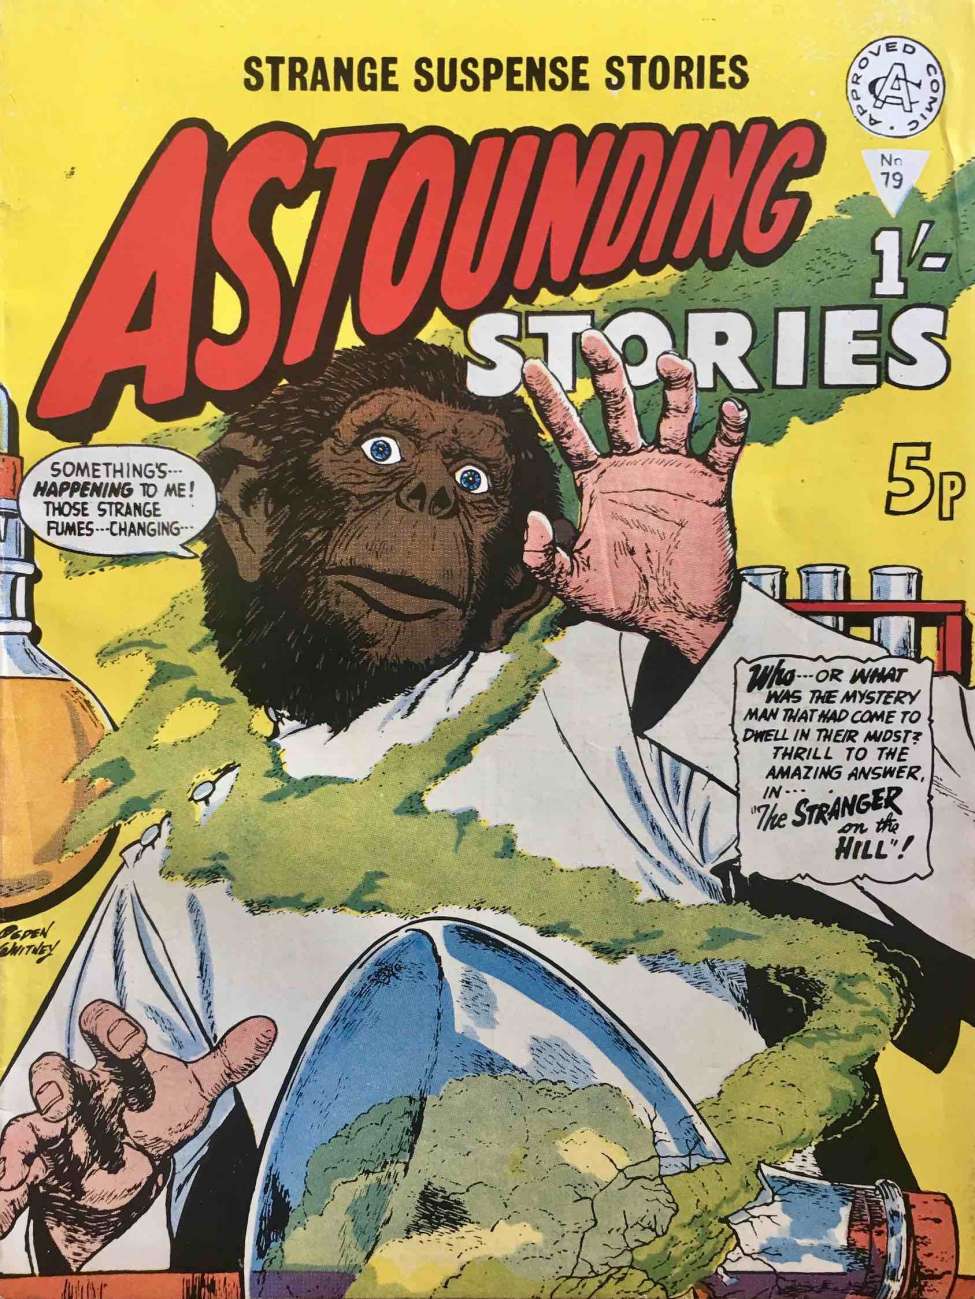 Book Cover For Astounding Stories 79